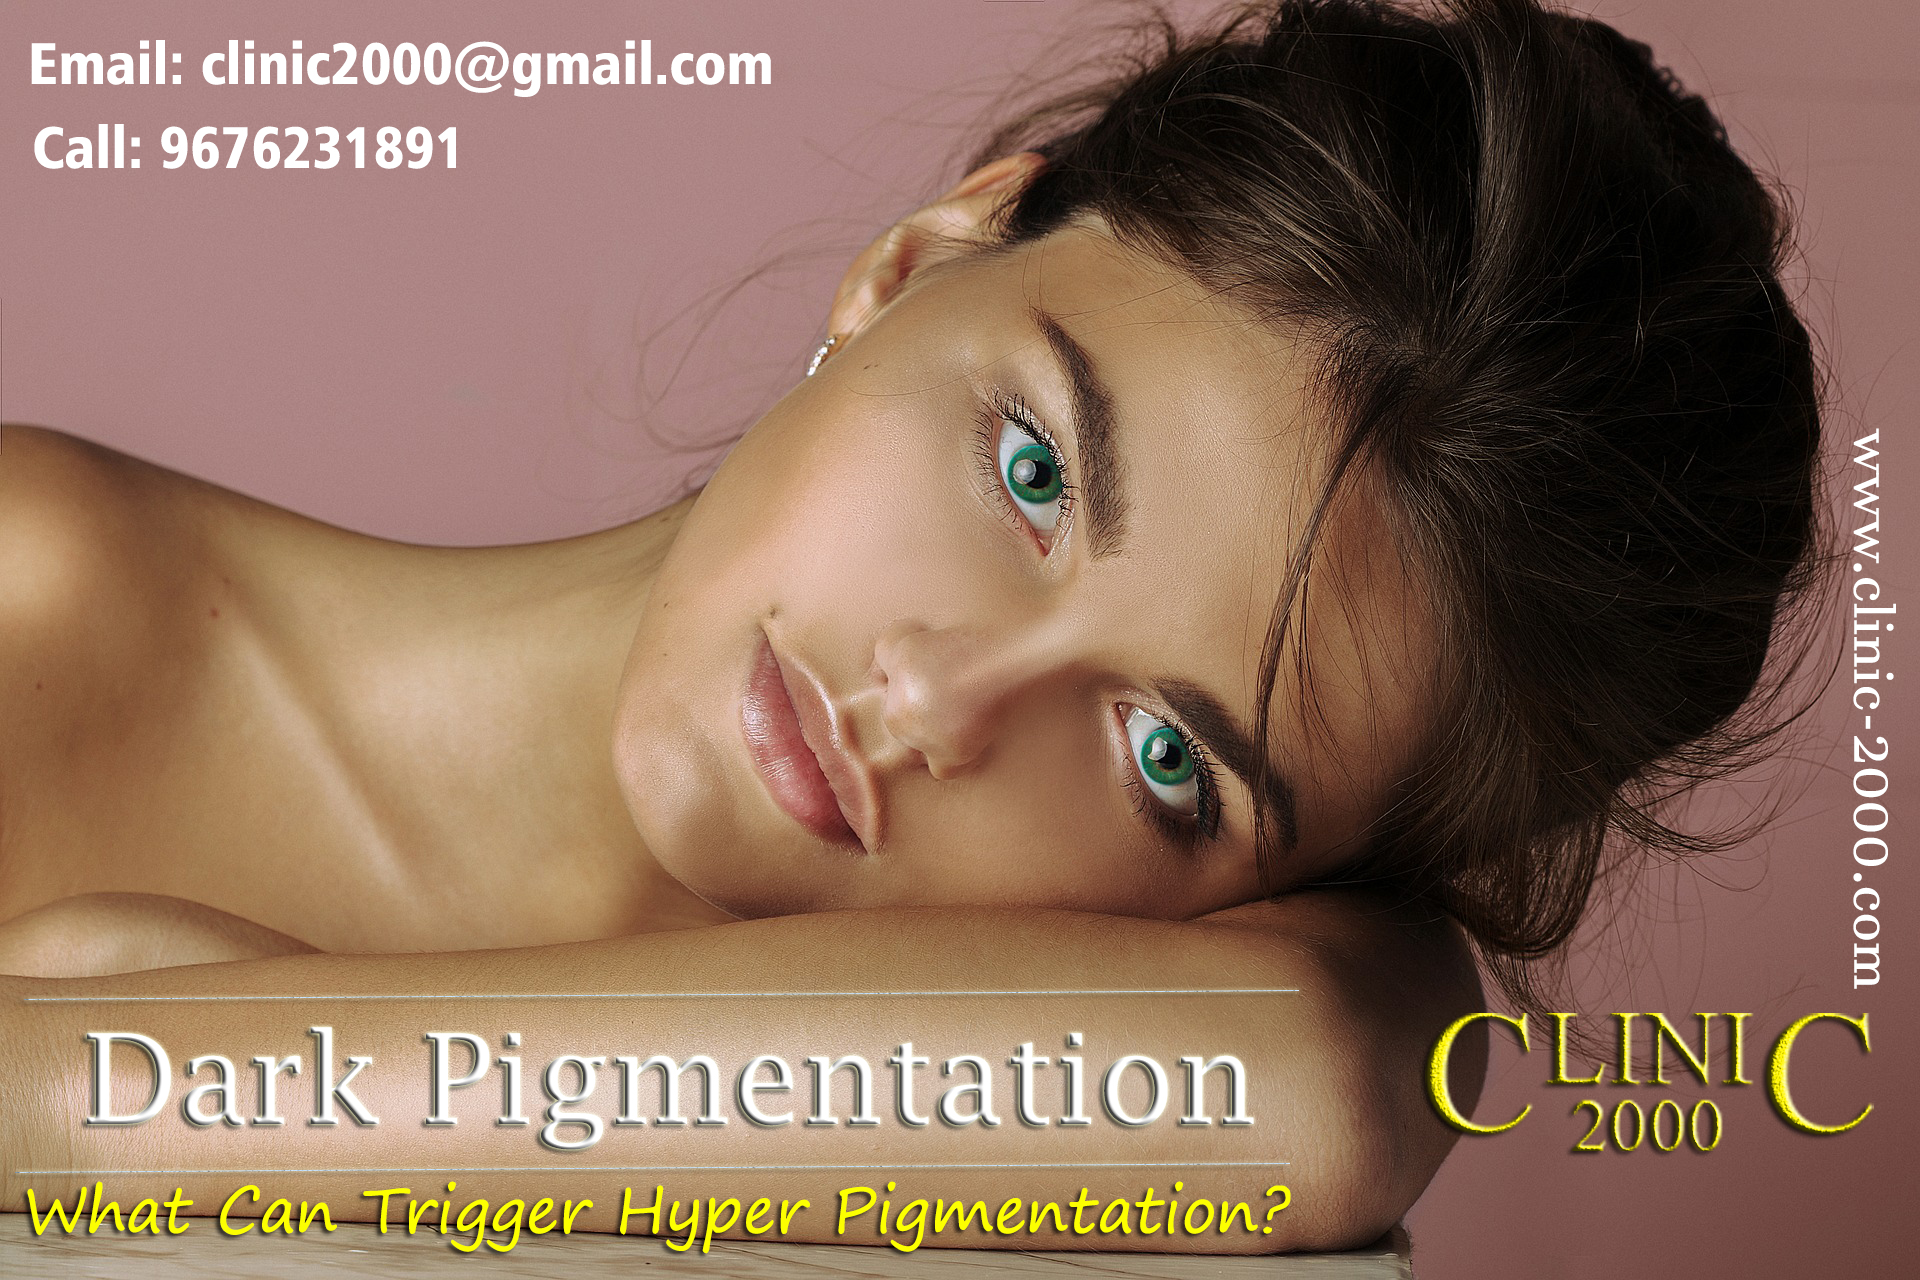 What is skin pigmentation